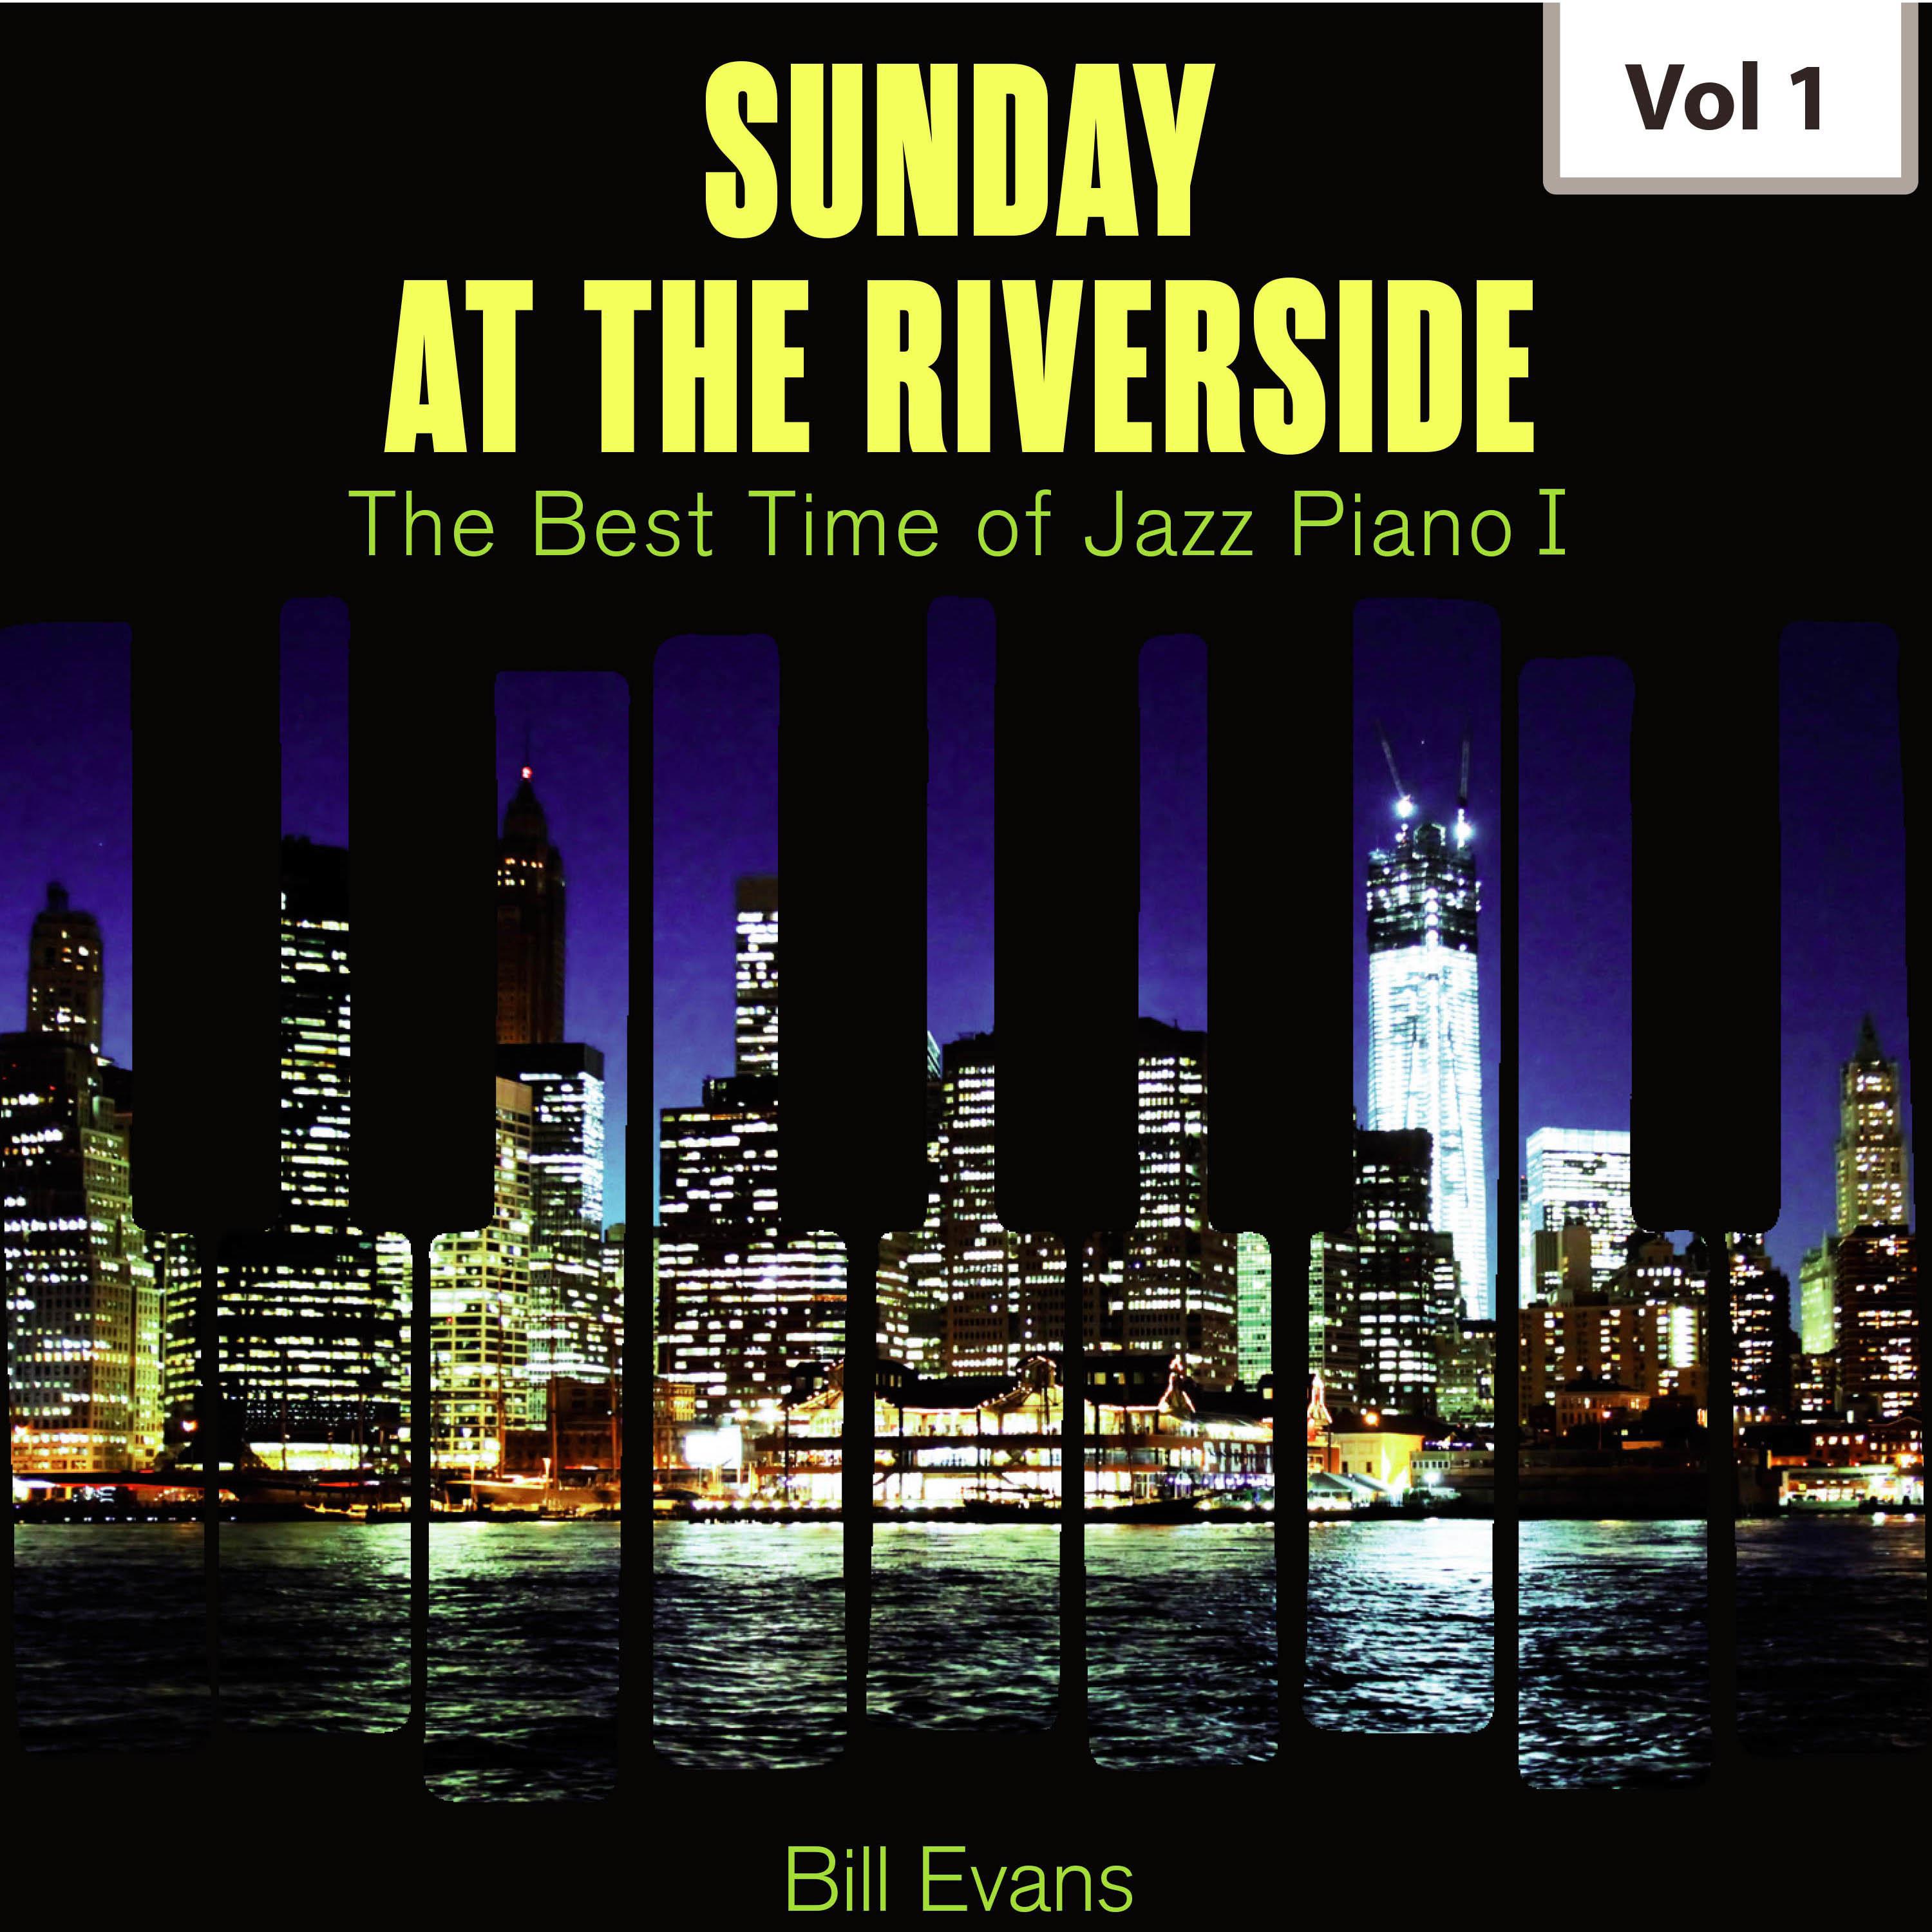 Sunday at the Riverside - The Best Time of Jazz Piano I, Vol. 1